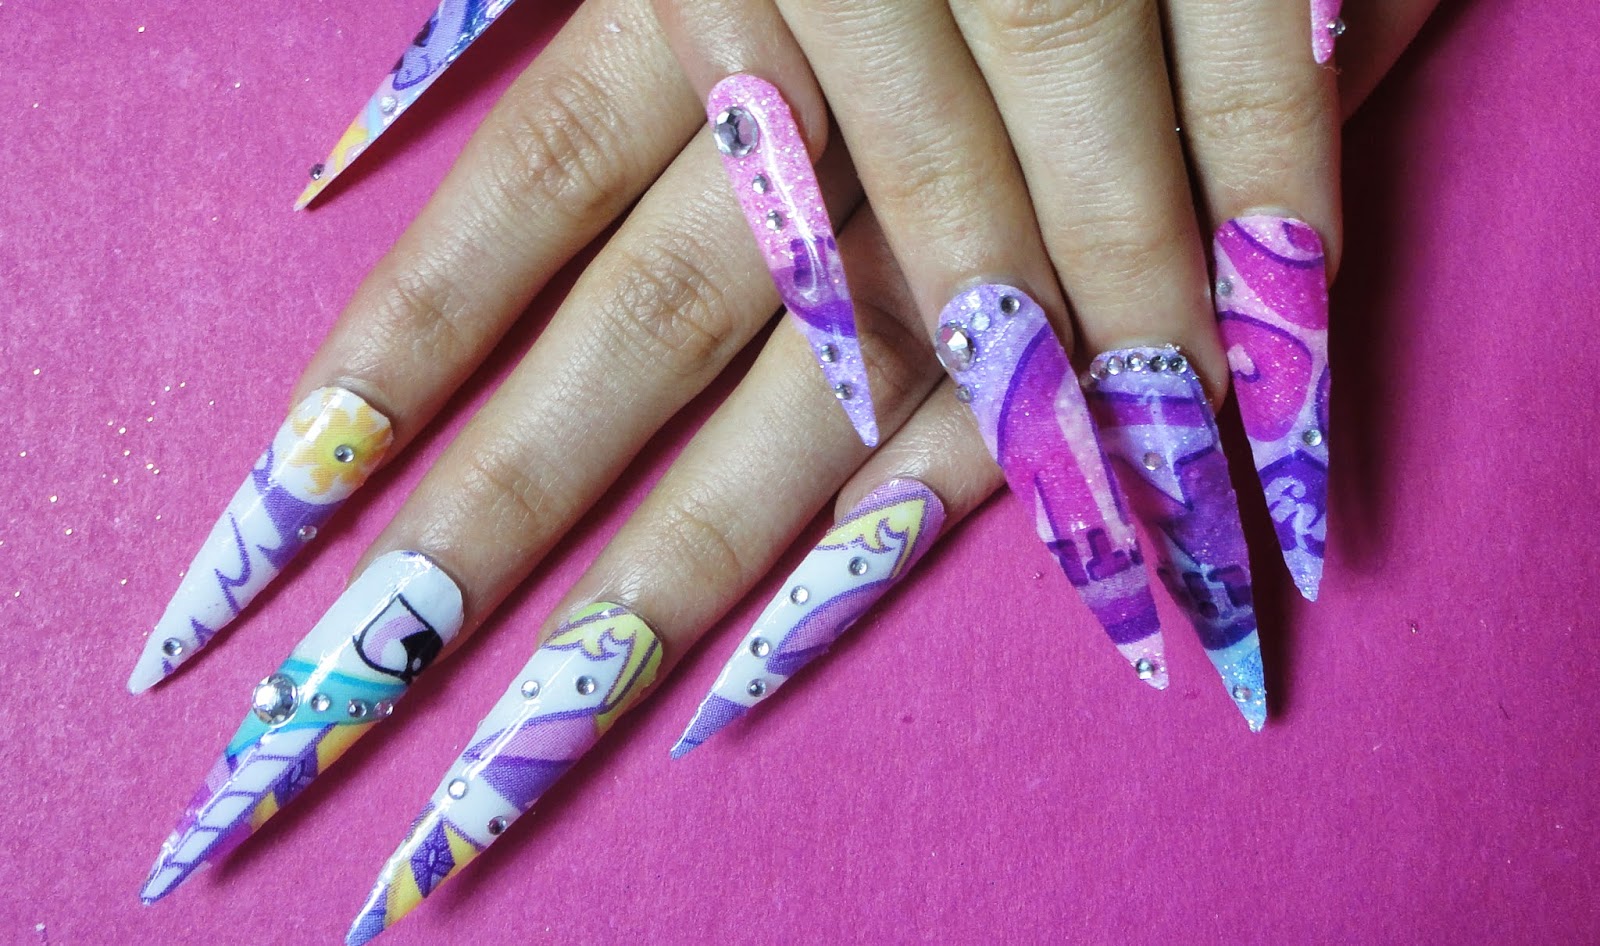 1. Simple Floral Nail Art Tutorial - wide 3